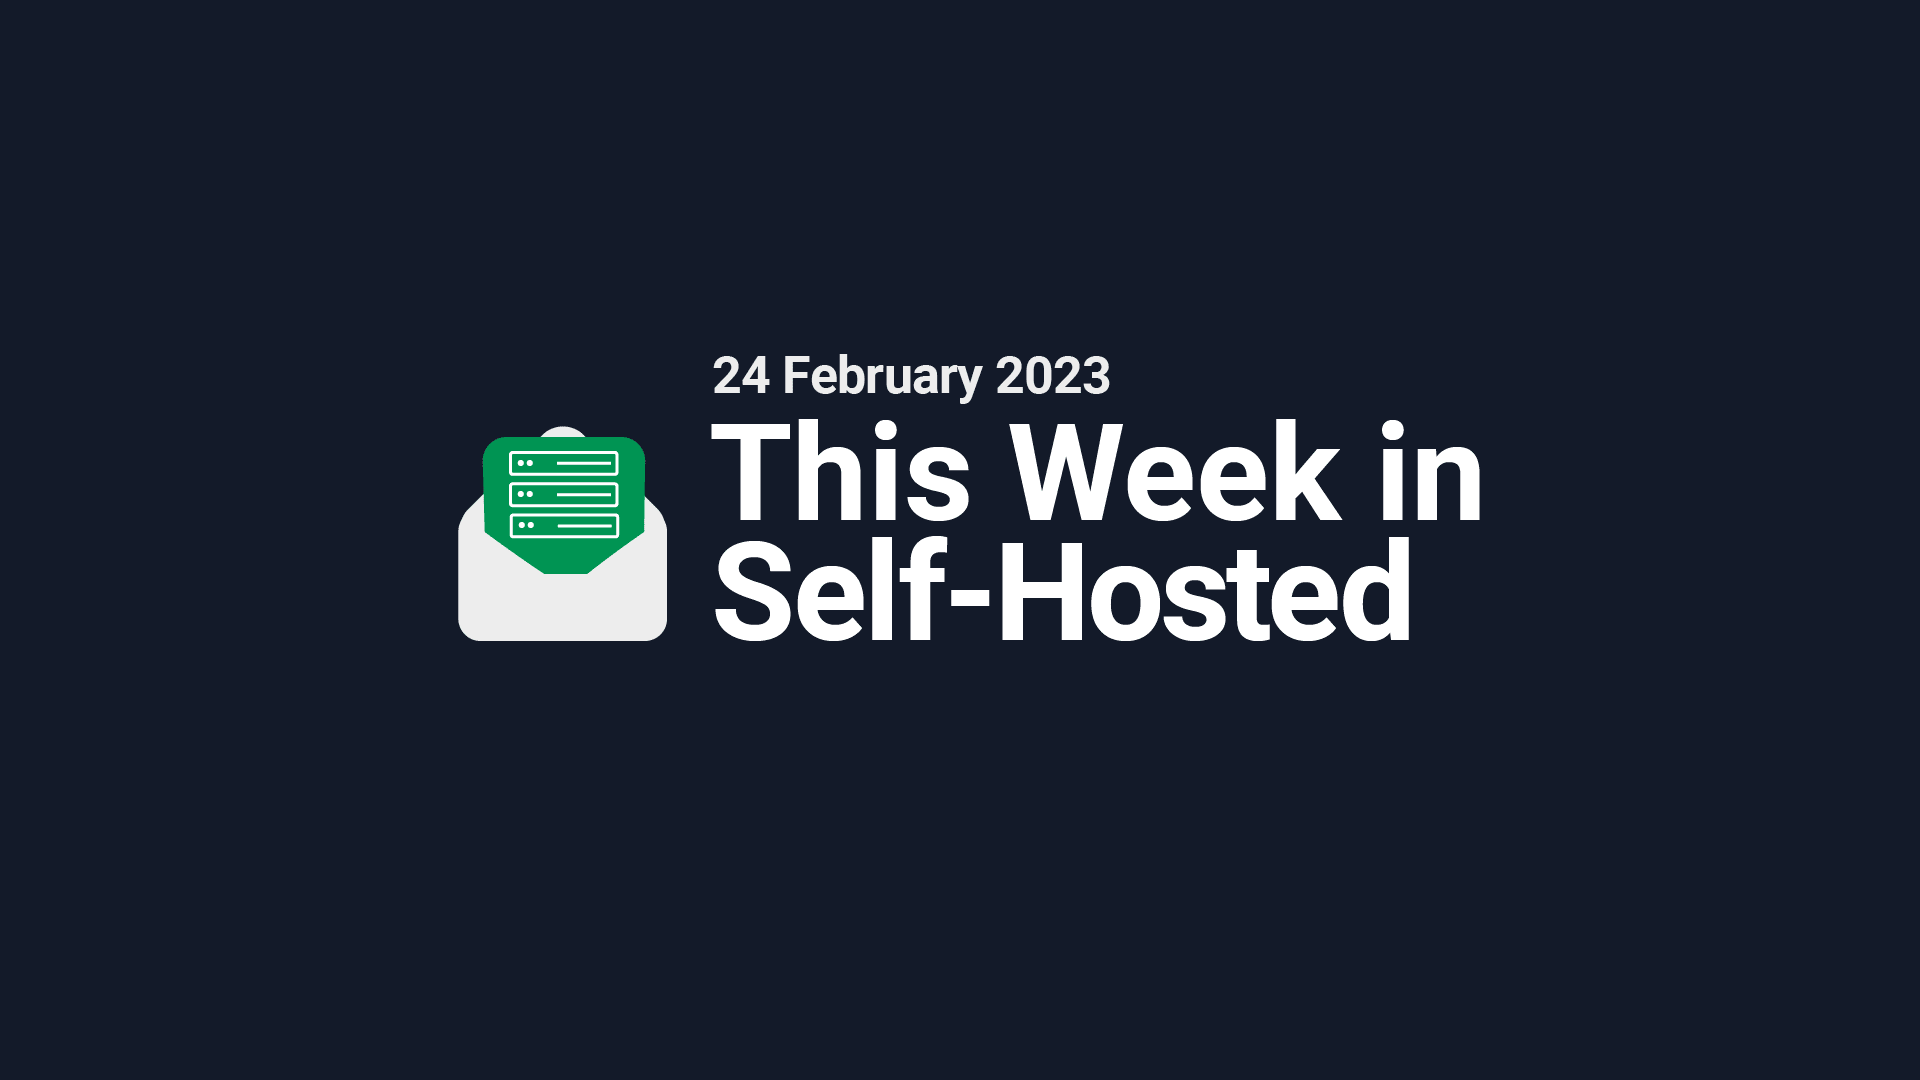 This Week in Self-Hosted (24 February 2023) Post image